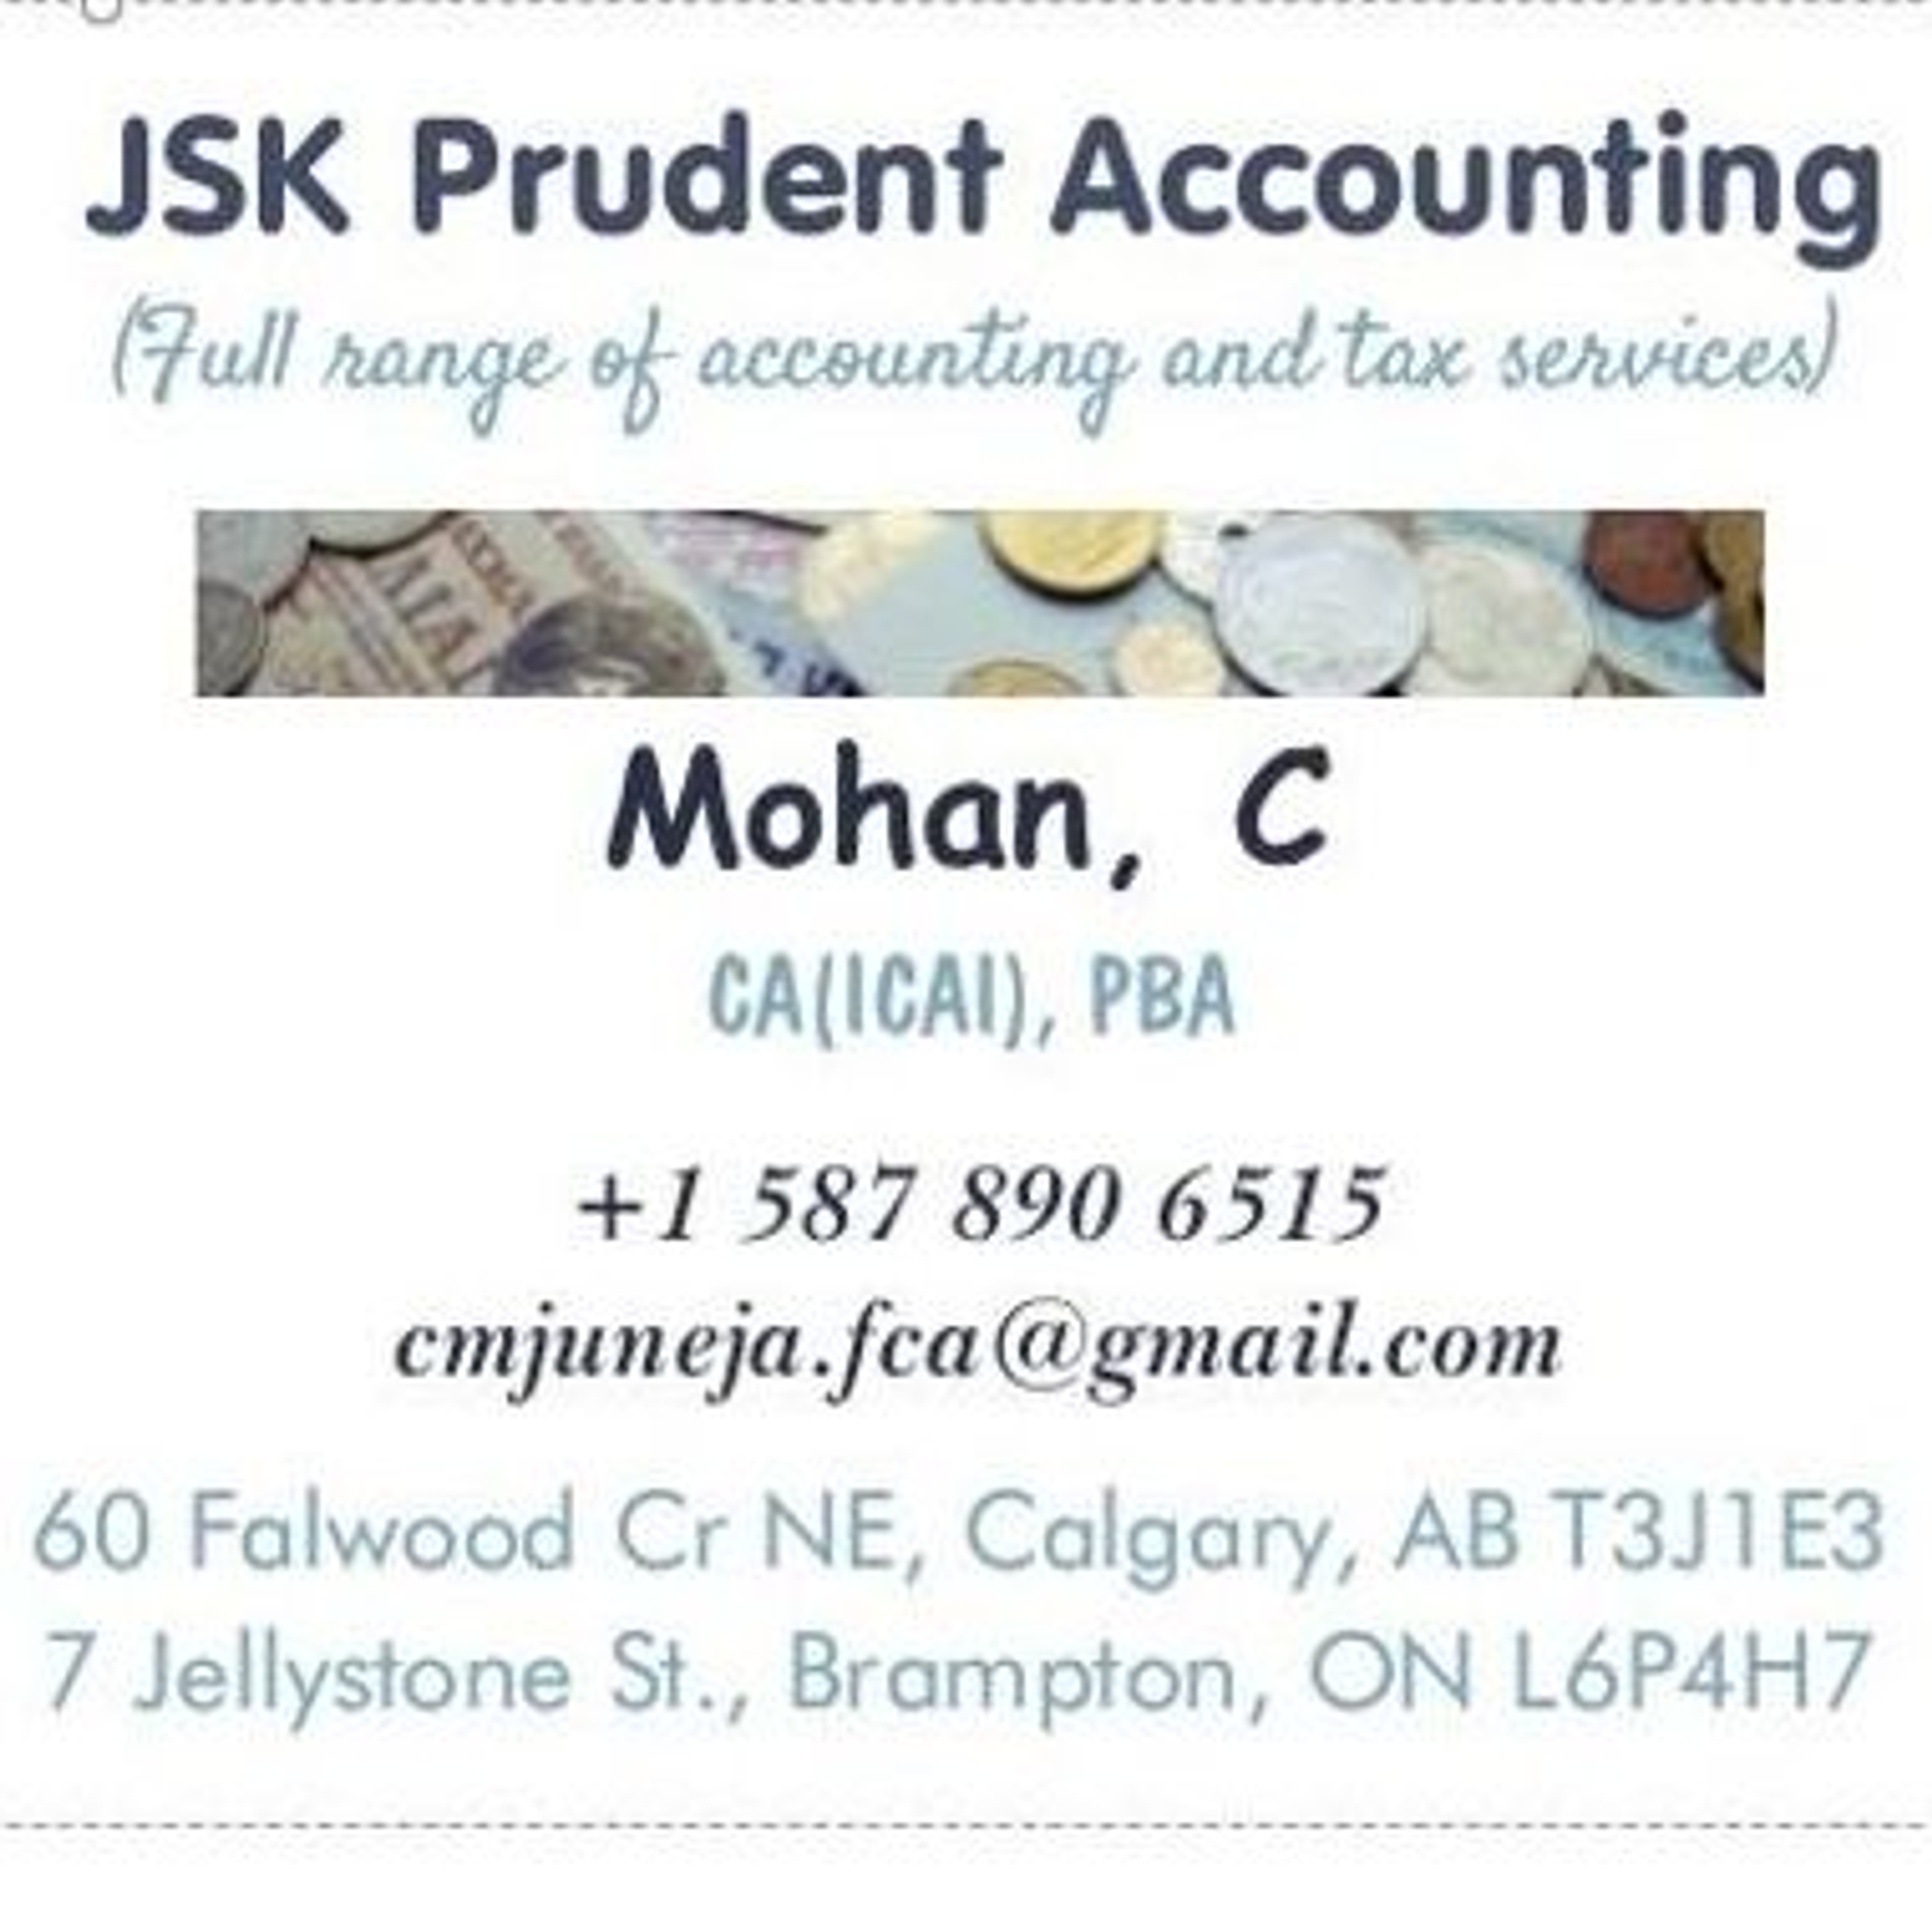 CA from India with 15+ years experience in public accounting. Currently pursuing CPA from CPAWSB, Alberta